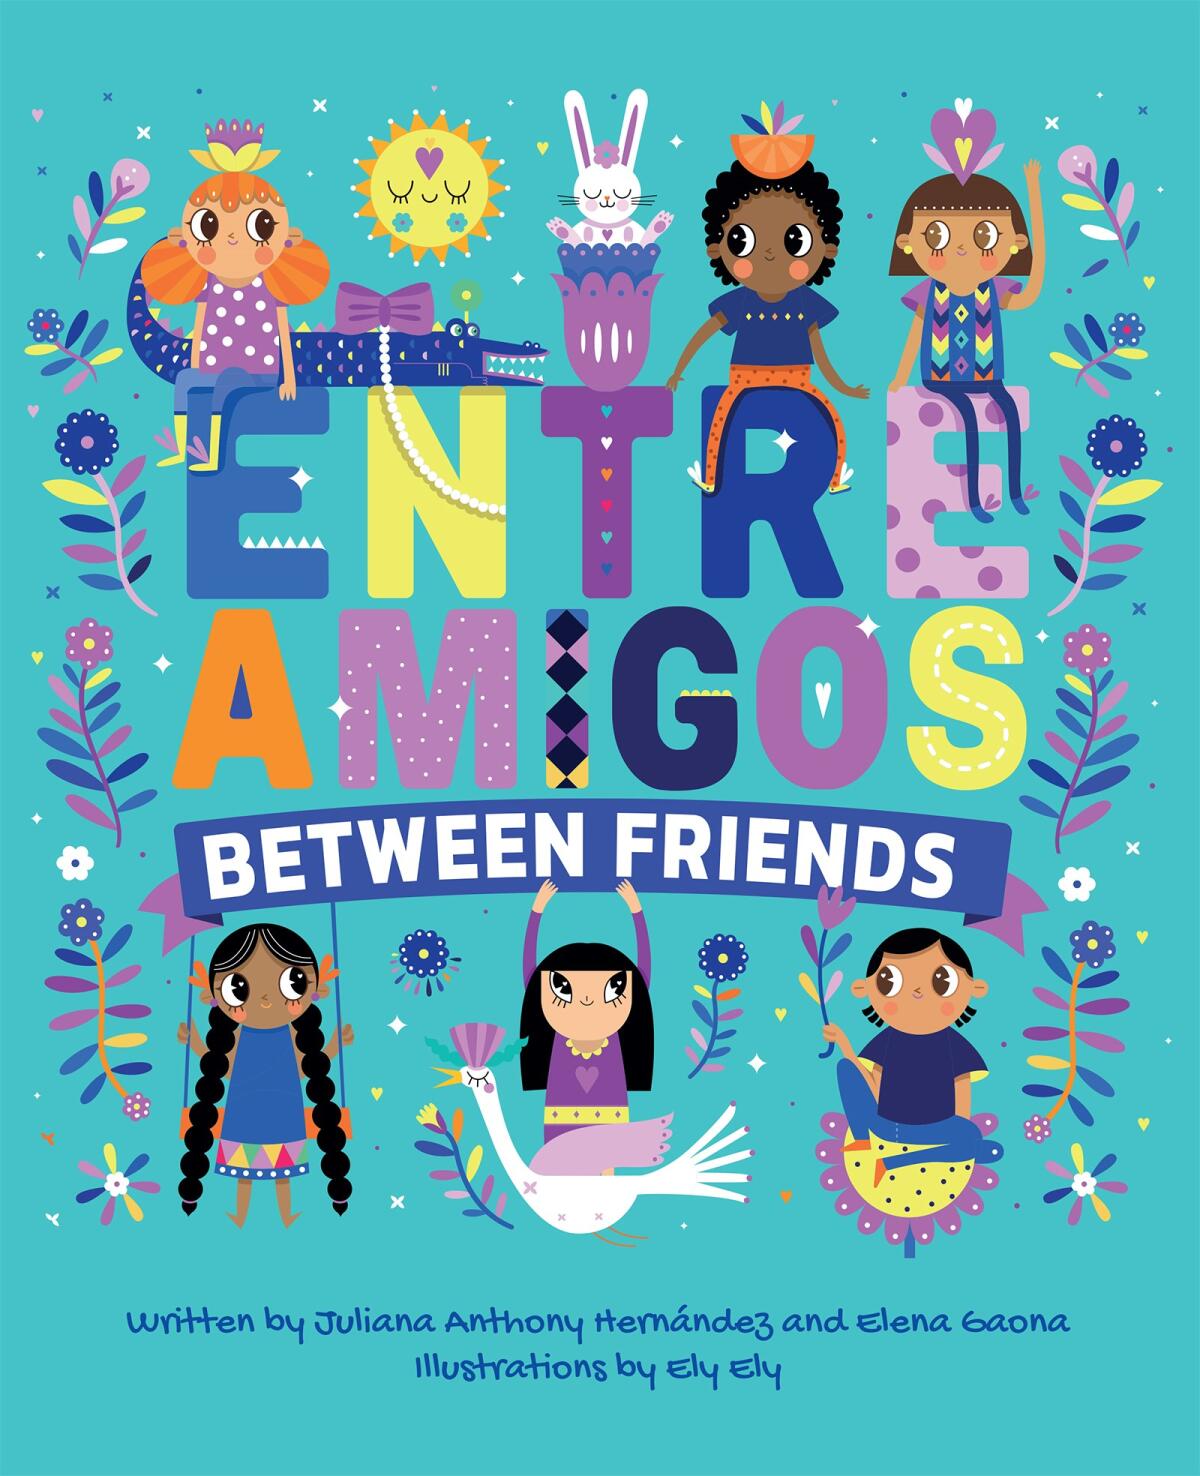 Cover of the children's book "Entre Amigos (Between Friends)," released on June 15.